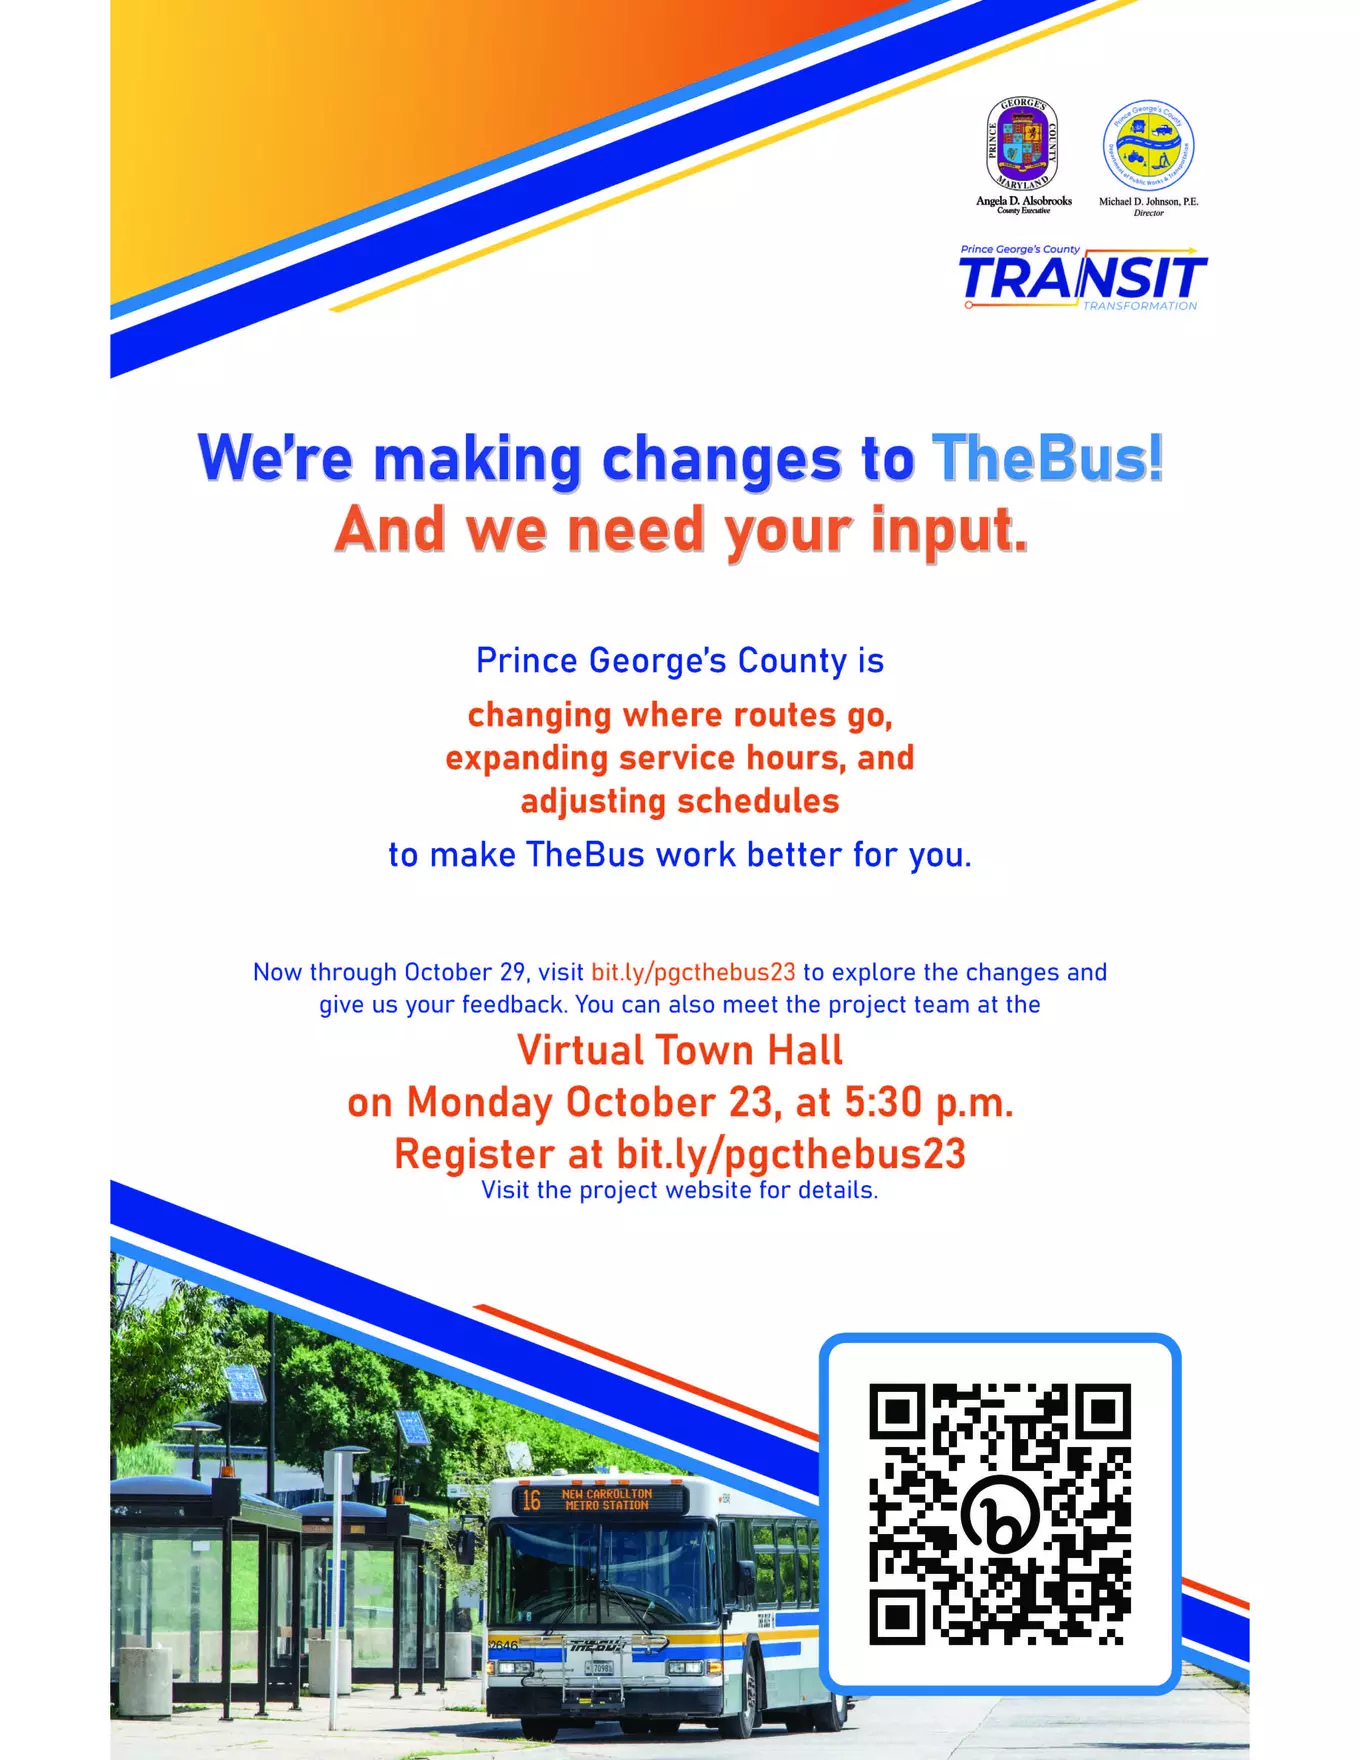 Prince George's County is changing where routes go, expanding service hours, and adjusting schedules to make TheBus work better for you.